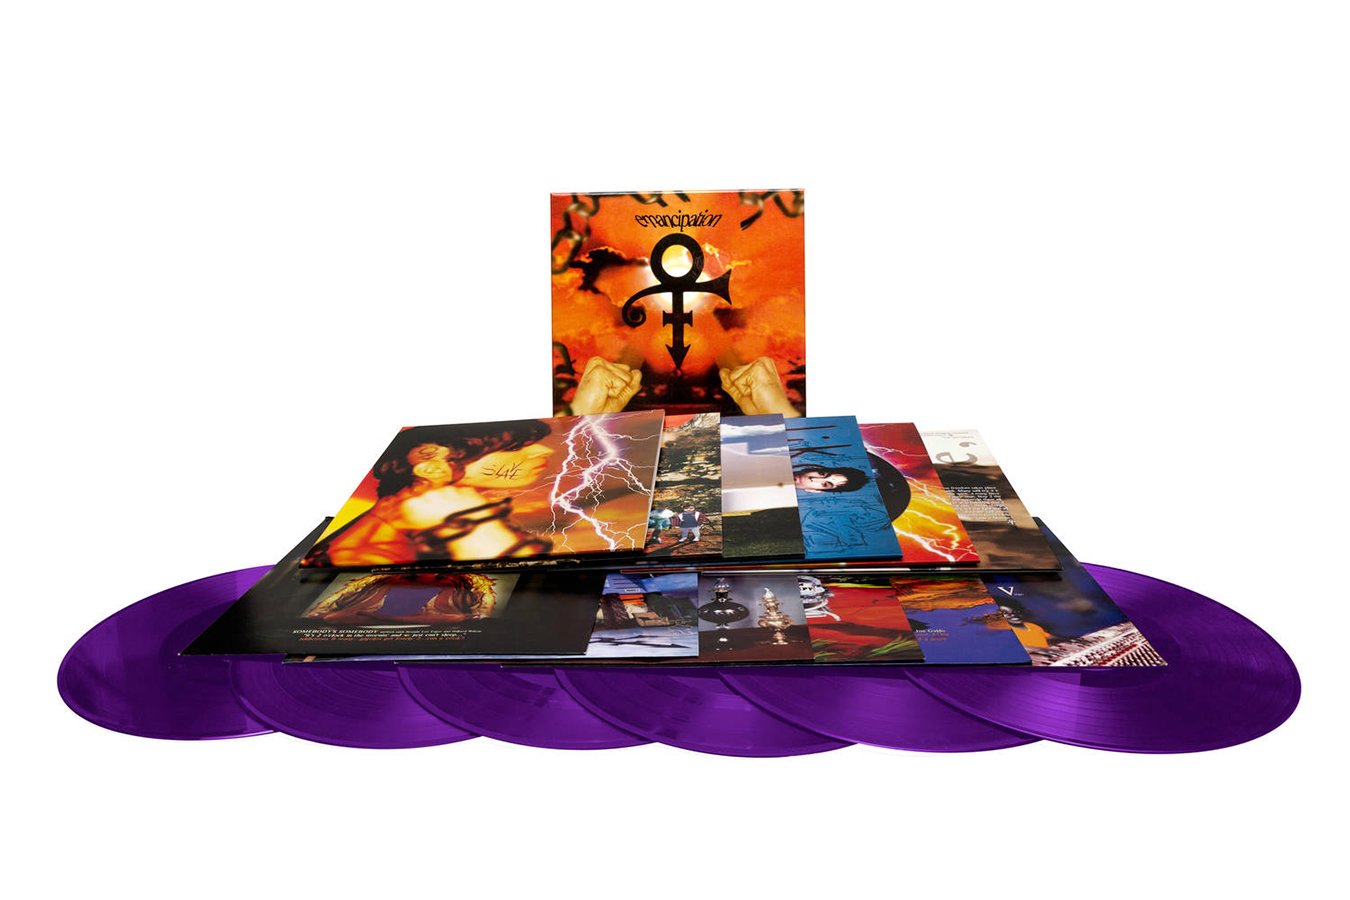 The Prince Estate in Partnership with Legacy Recordings Announces Next Wave of Titles in Definitive Prince Reissue Project Coming Friday, September 13